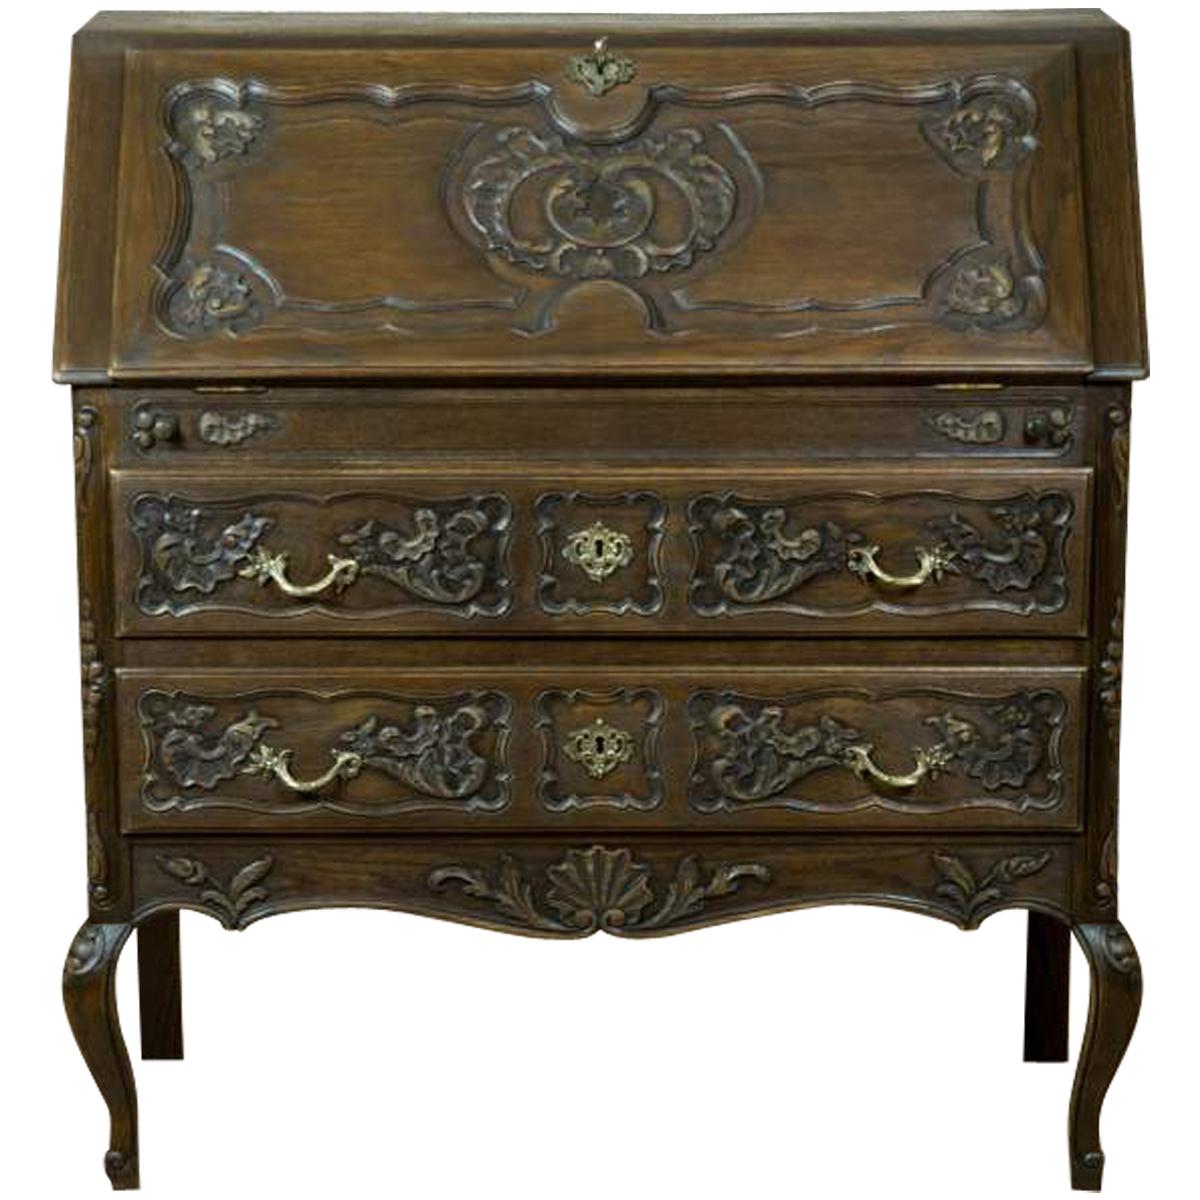 20th Century Writing Desk in the Neo-Rococo Forms